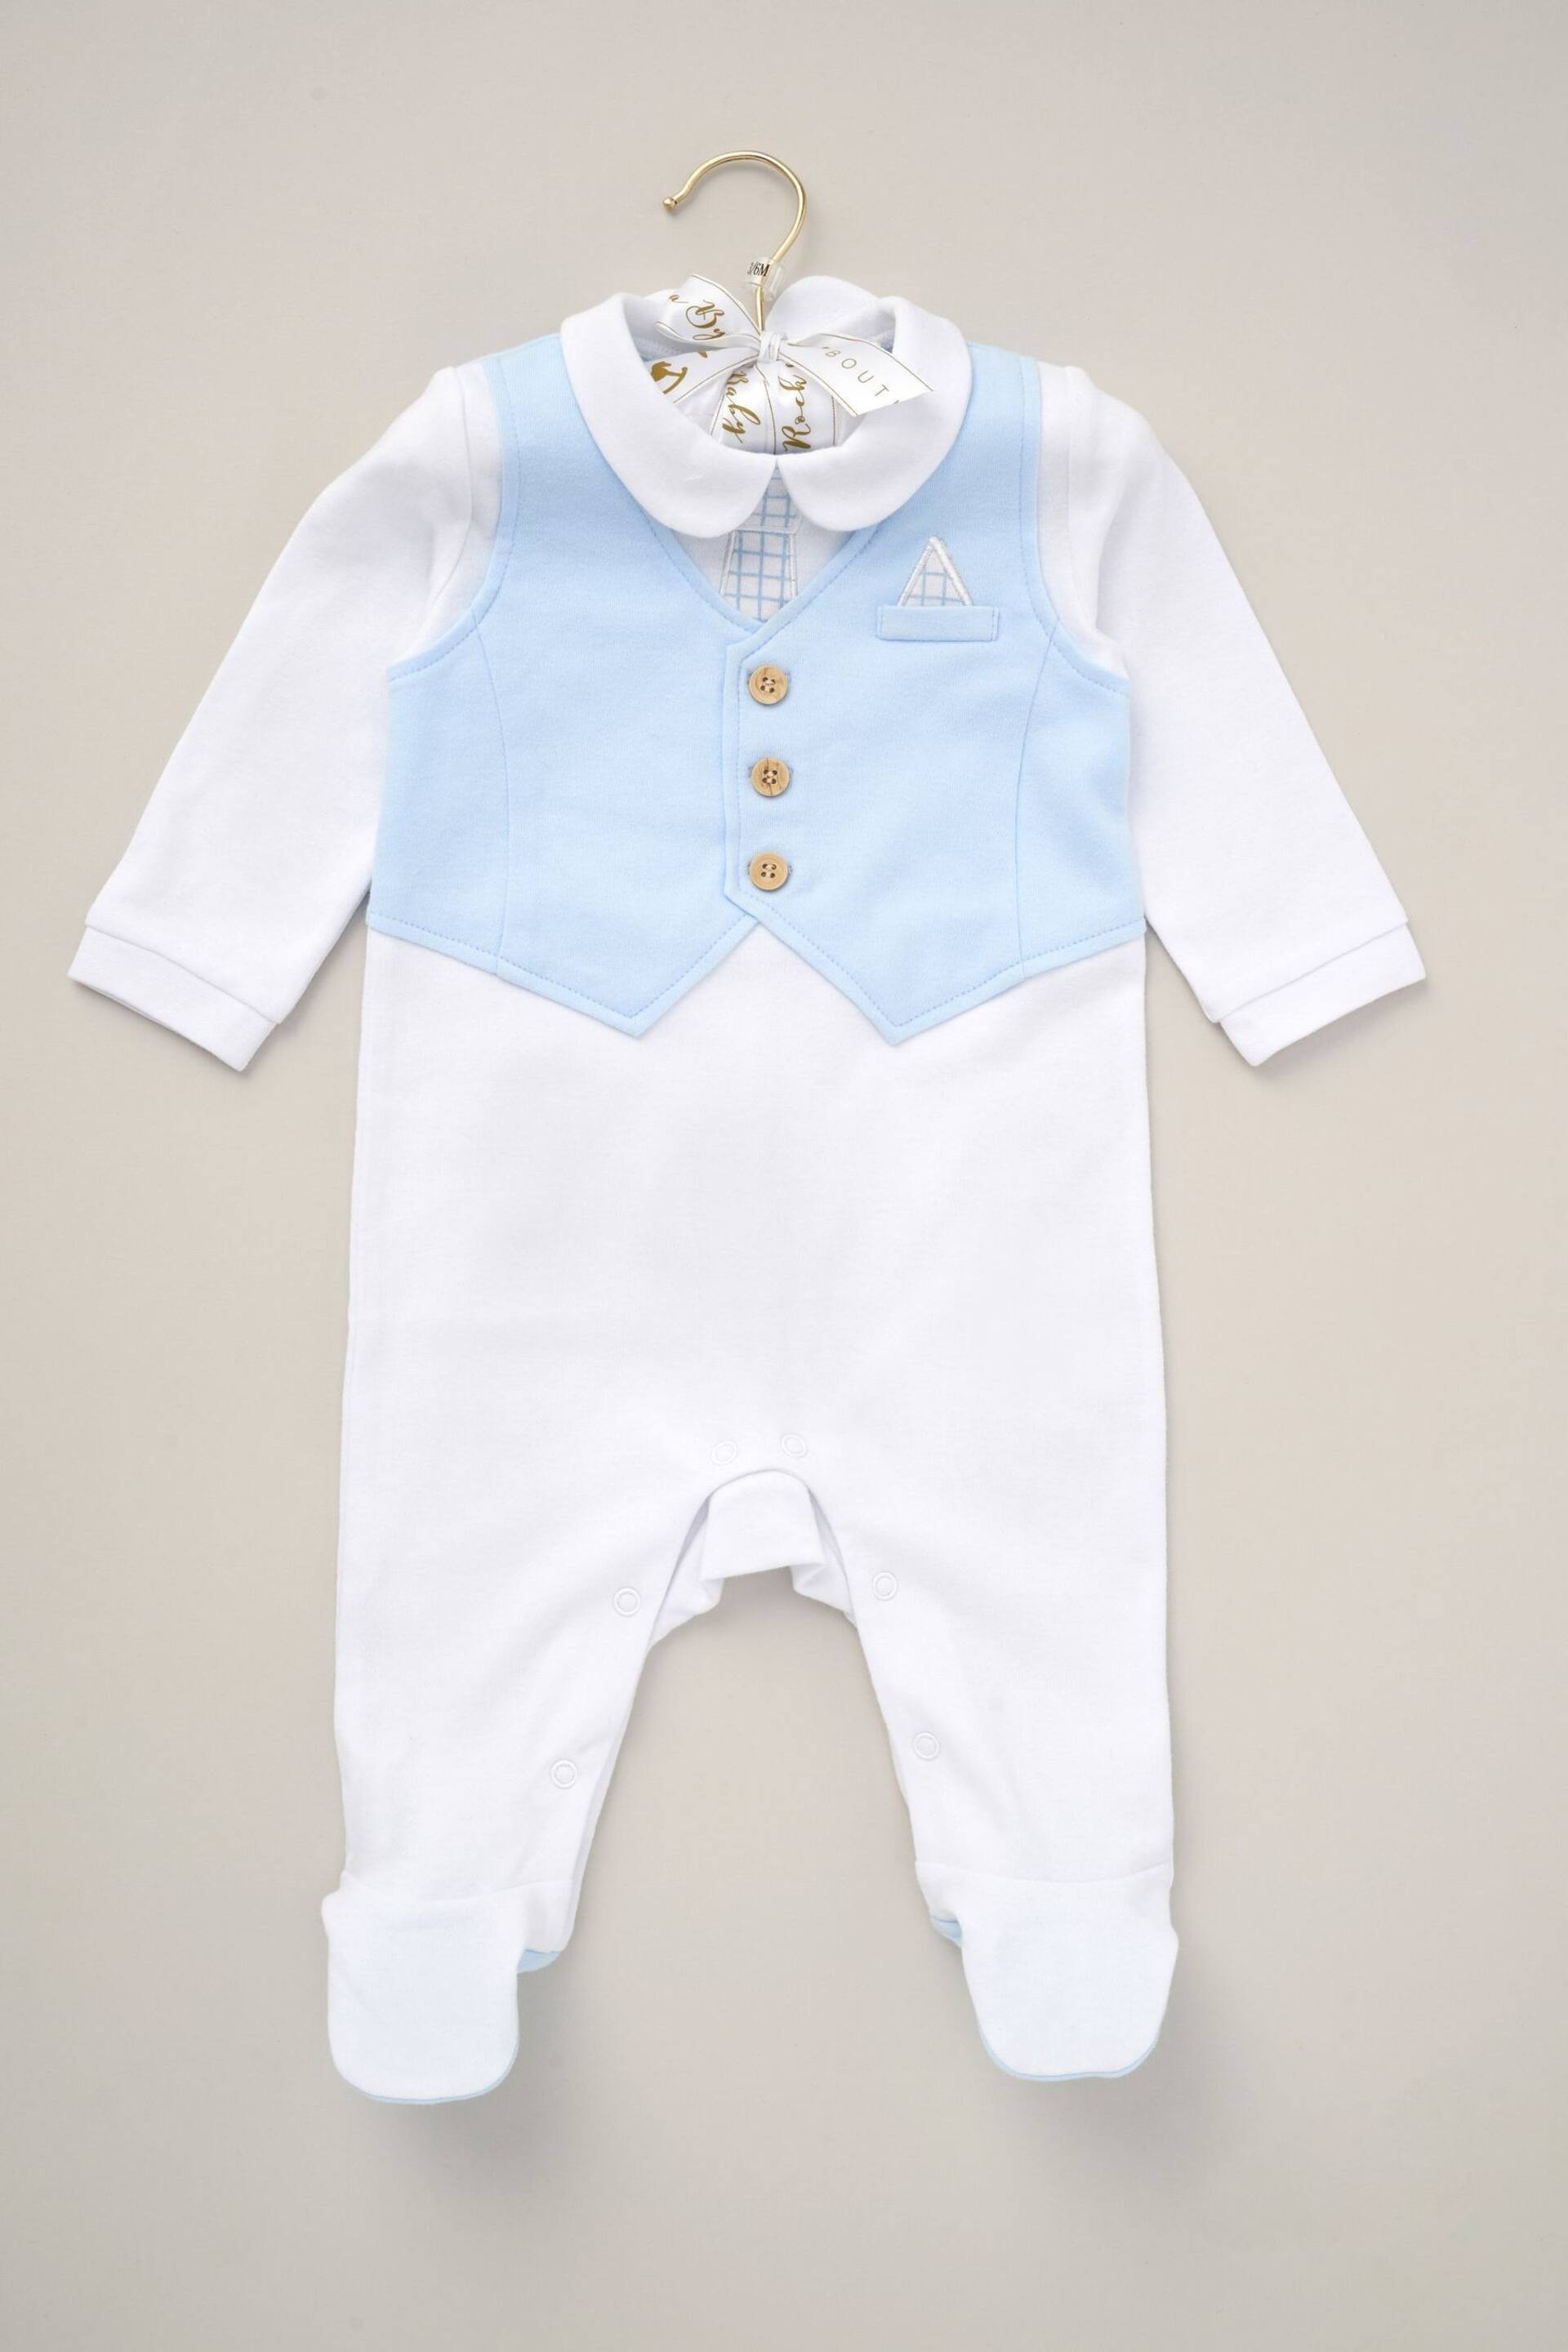 Rock-A-Bye Baby Boutique Blue Mock Waistcoat All-in-One Sleepsuit - Image 1 of 1